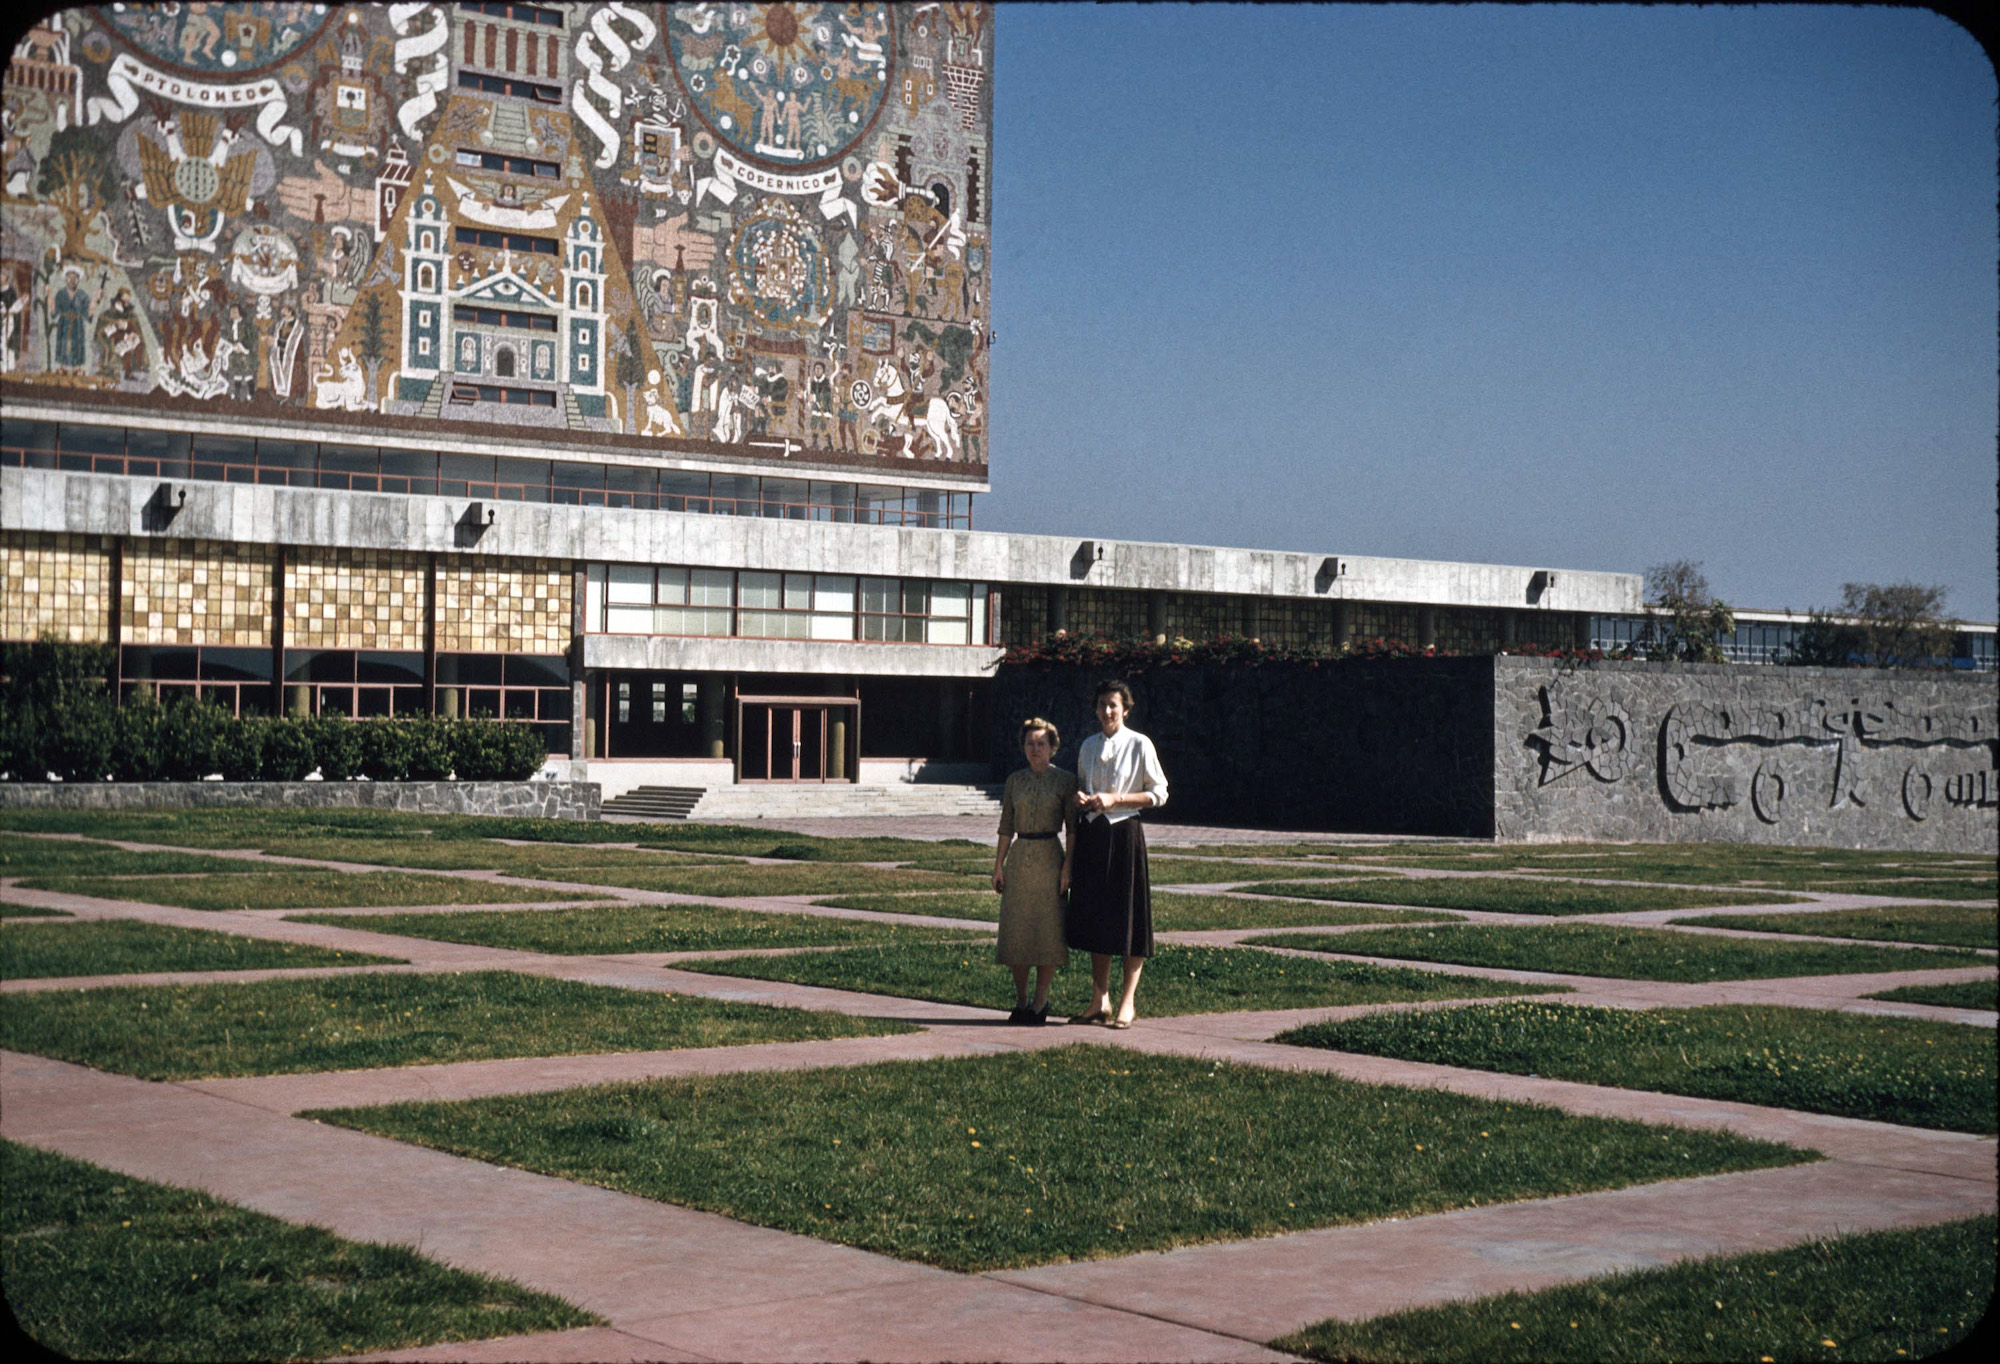 Ciudad Universitaria (University City), Mexico is the main campus of the National Autonomous University of Mexico.  Located in the southern part of Mexico city its construction on a solidified lava bed was finished in 1954.

My Aunt Lee is on the right (I'm assuming that Aunt Emmy took this picture since that is not her by Lee's side). My Aunts, at ages 38 and 40, were on their first international trip. At the time of this trip they had worked at least 15 years as executive secretaries at GM divisions in Anderson, Indiana.

The mural pictured here is recognized as the largest mural in the world, covering all sides of the Library. The mural is based on Aztec and Spanish motifs and UNAM's coat of arms.  The artist was Juan O'Gorman, a painter and architect. 

The image was digitized from a 35mm Kodachrome slide. View full size.